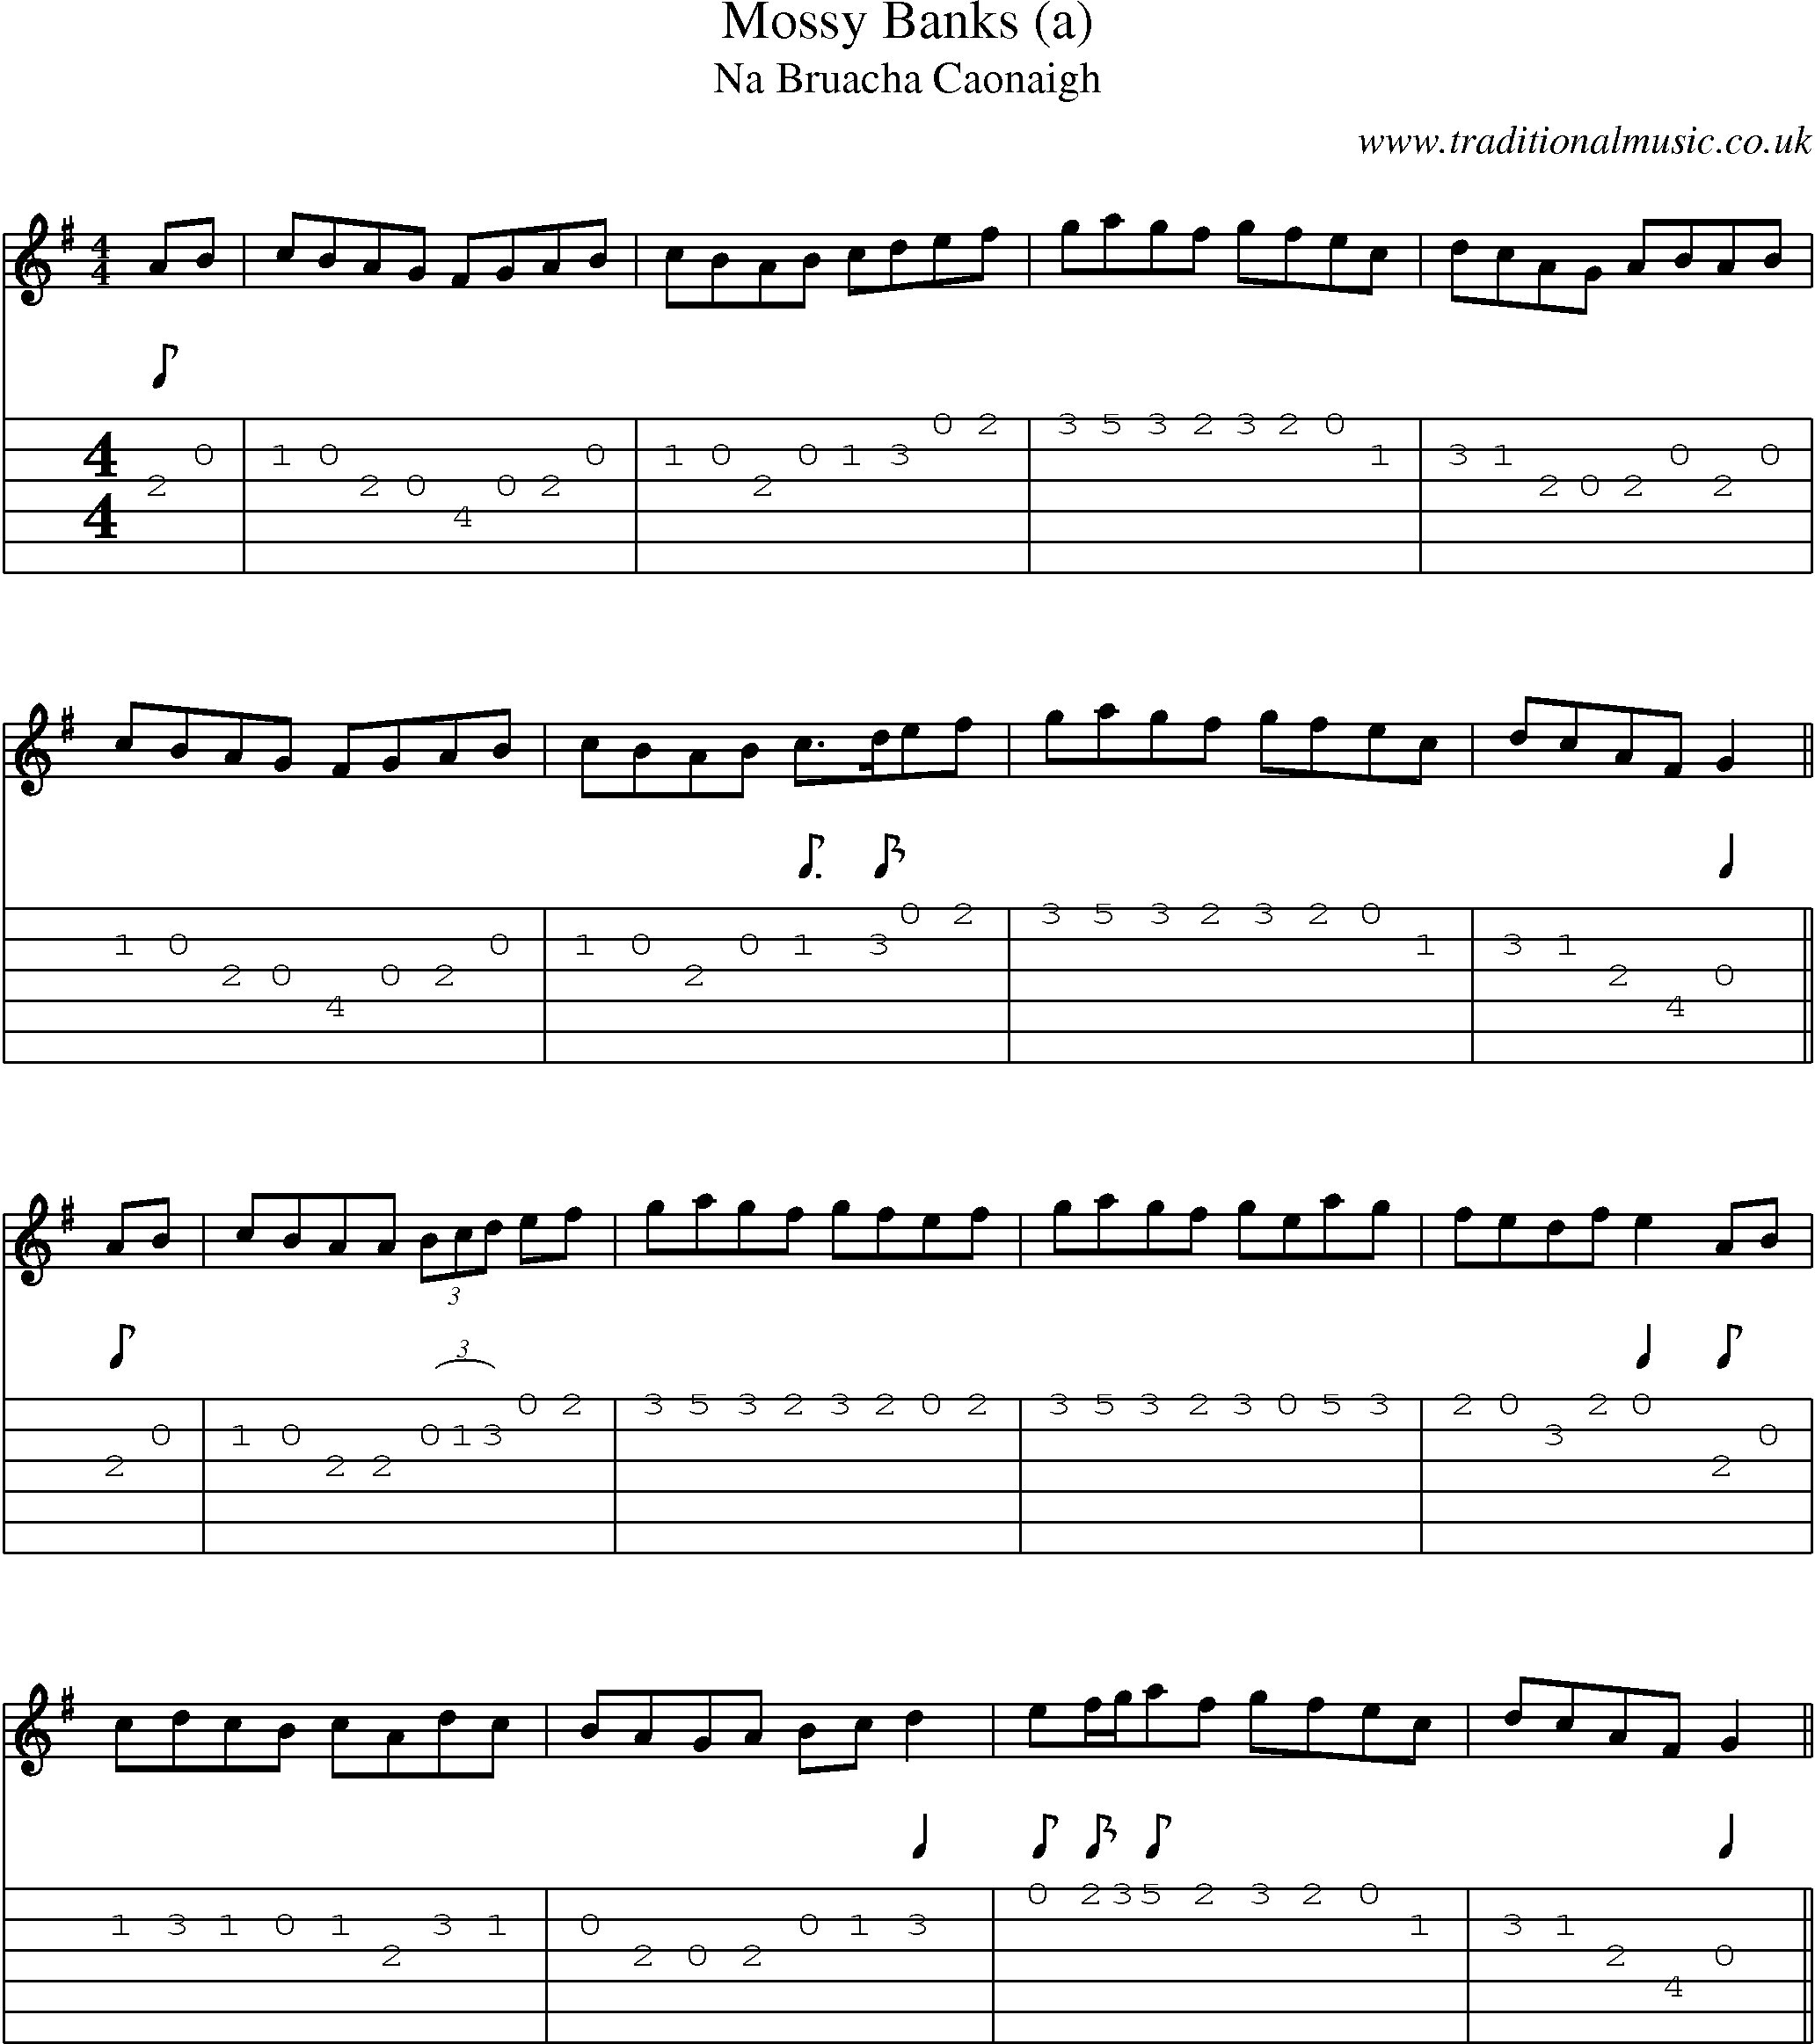 Music Score and Guitar Tabs for Mossy Banks (a)